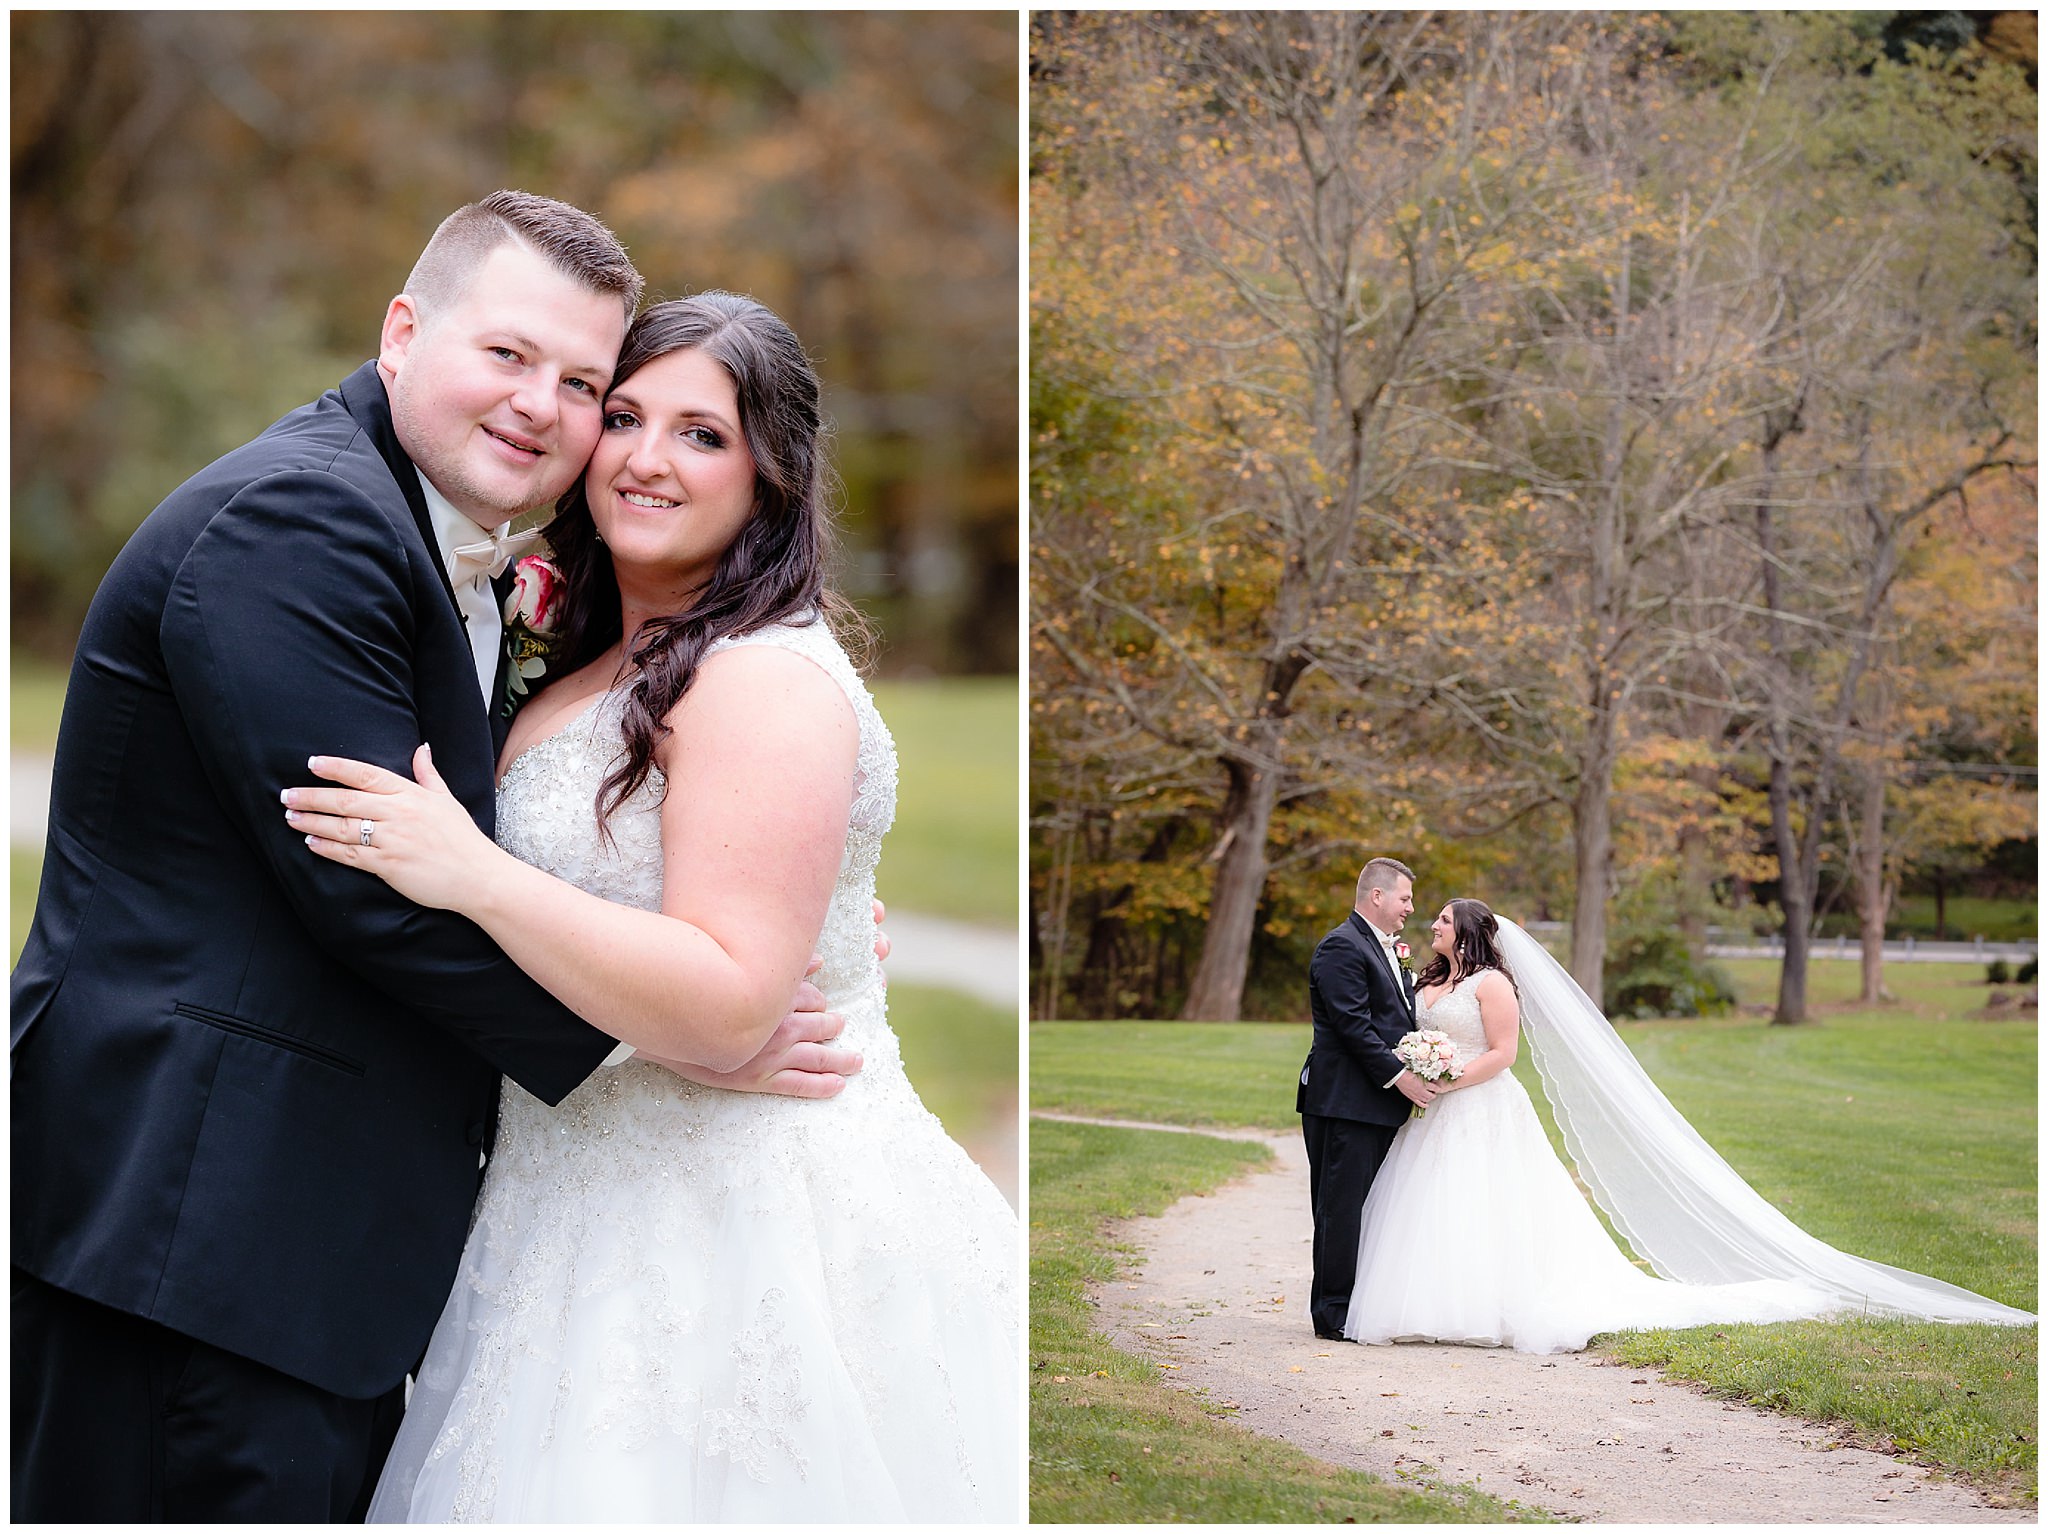 Bride and groom portraits at Olson Park in Moon Township